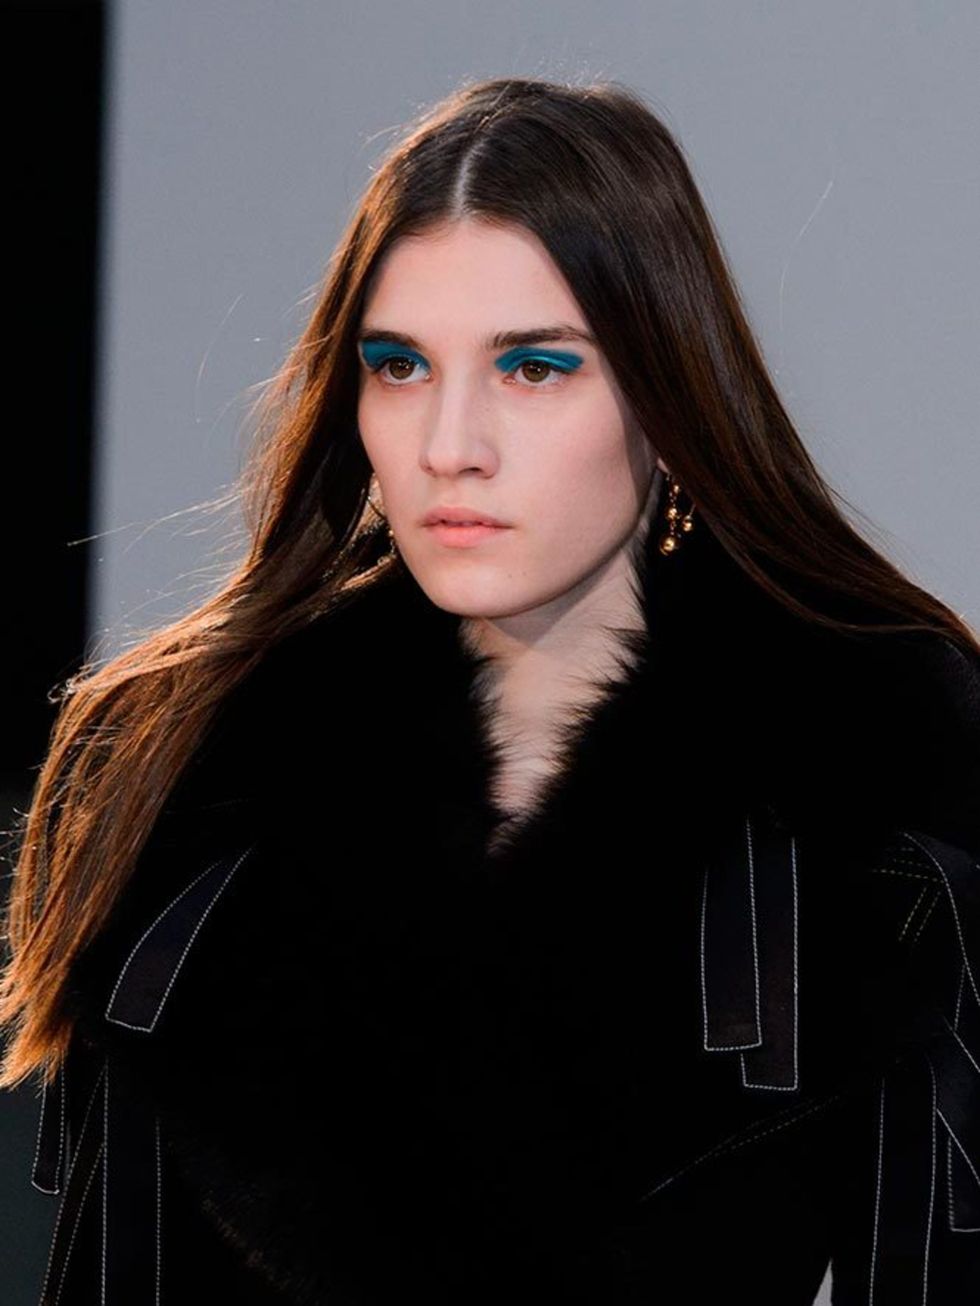 <p><a href="http://www.elleuk.com/catwalk/celine/autumn-winter-2015"><strong>Celine</strong></a></p>

<p>The look: Individuality</p>

<p>Hair stylist: <a href="http://www.elleuk.com/beauty/the-beauty-experts-you-need-to-know-charlotte-tilbury-backstage-be